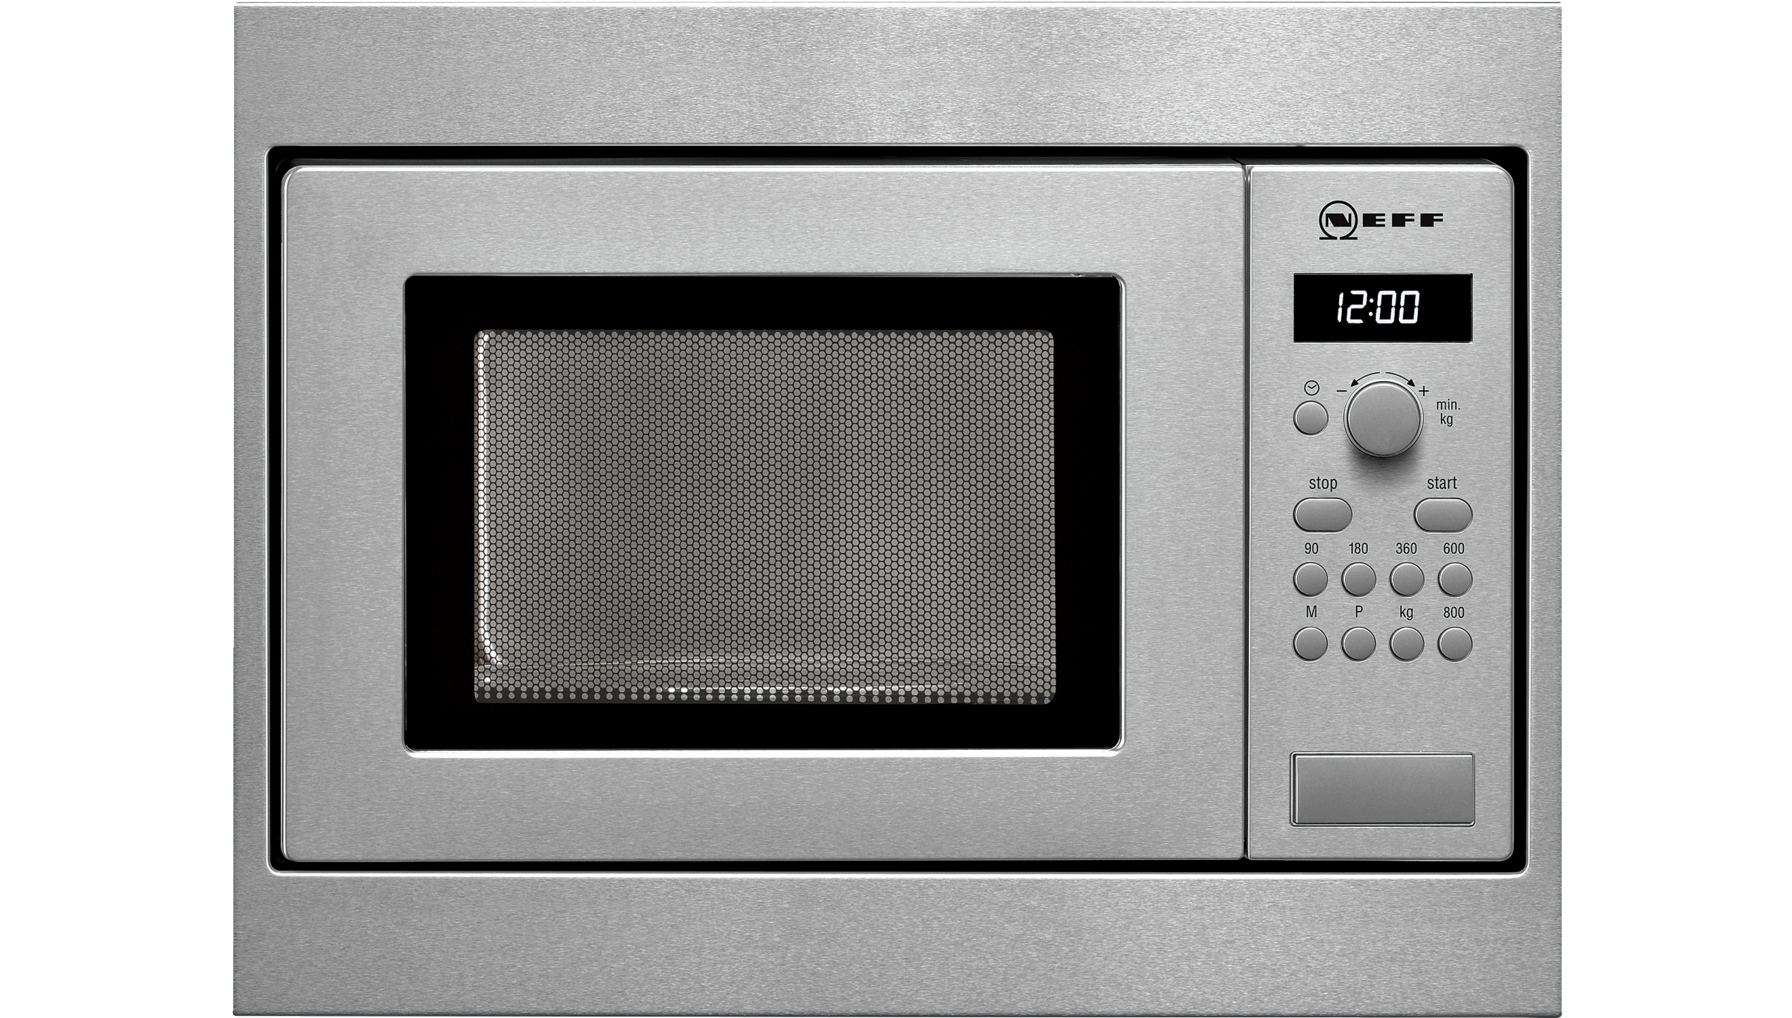 Product Showroom - Compact appliances - Microwave ovens - H53W50N3GB